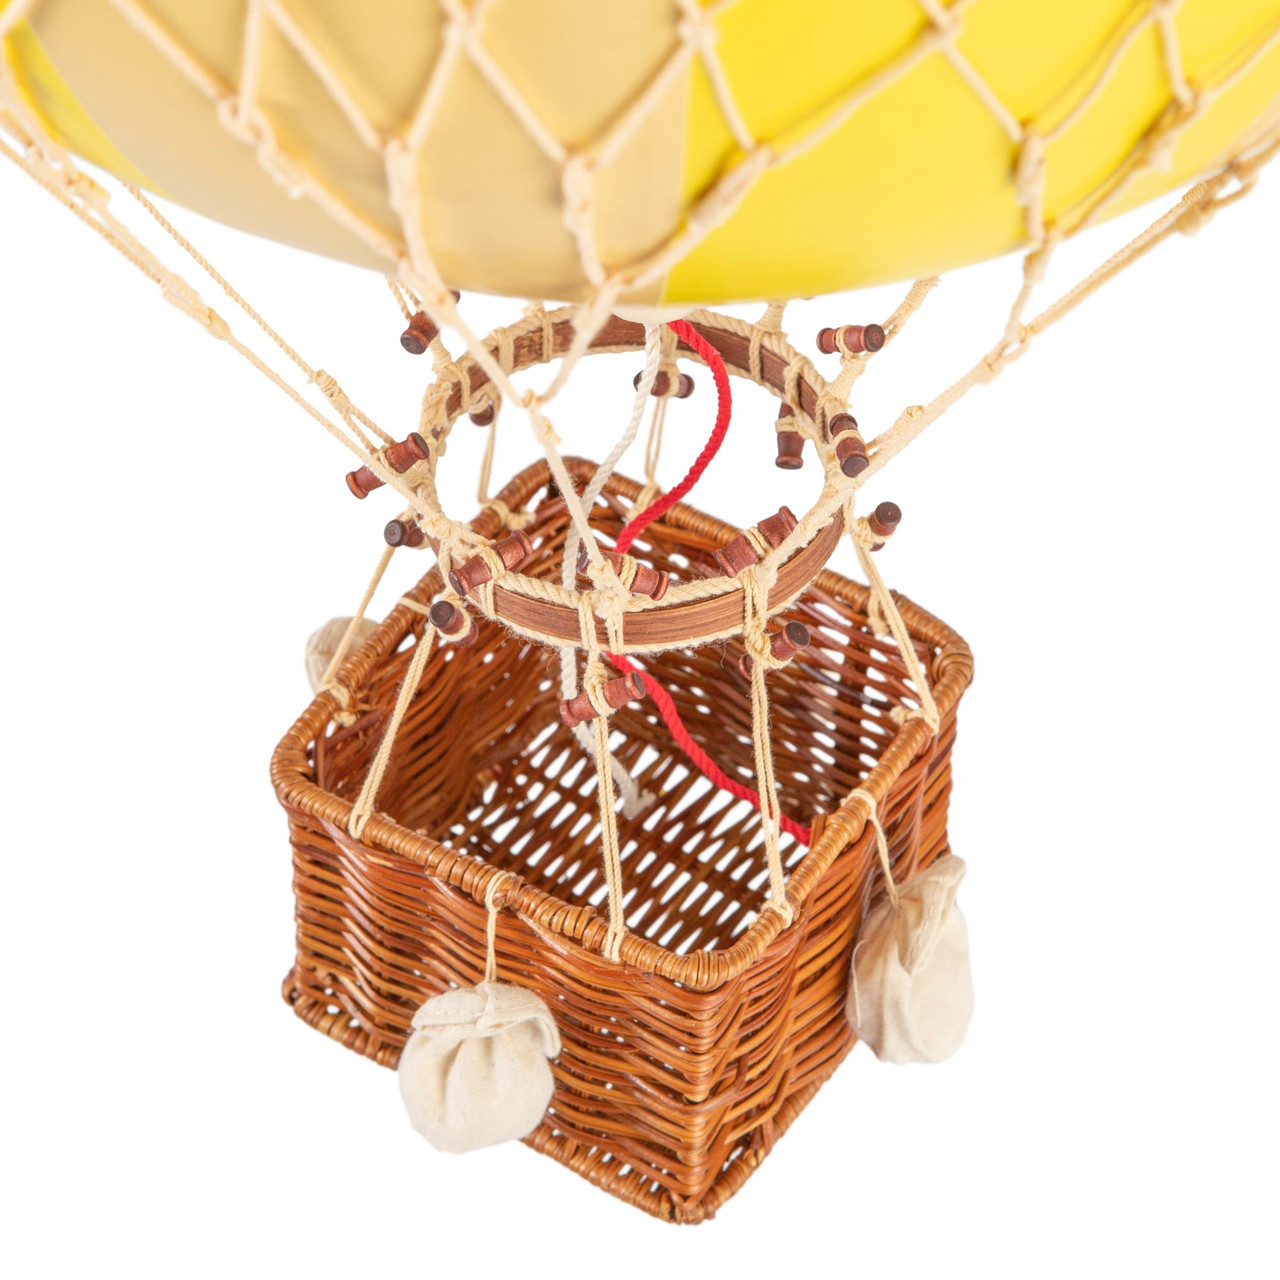 Hot Air Balloon Model Yellow White Wide Striped Ceiling Decor